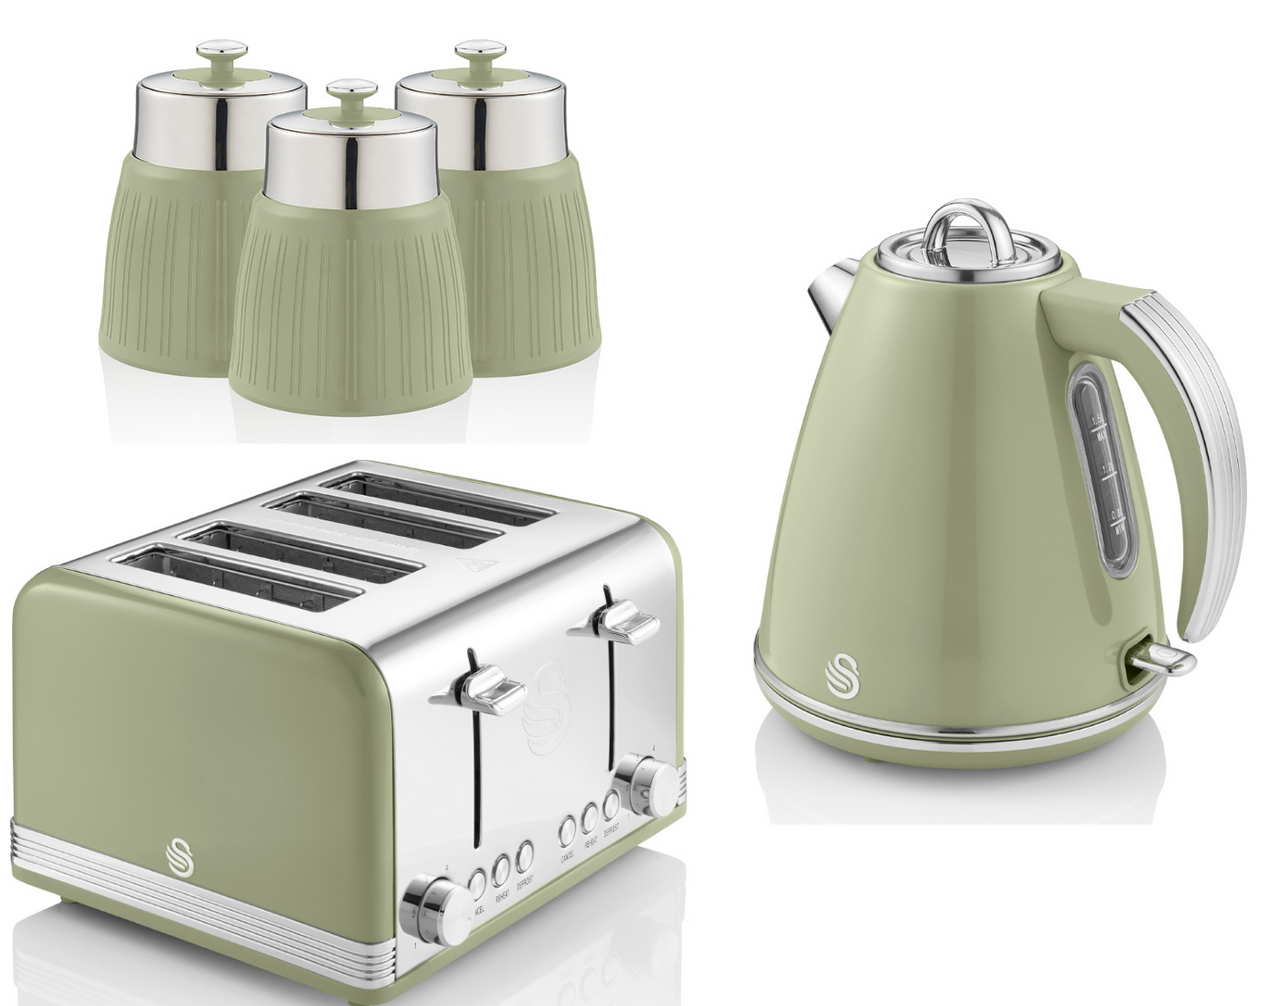 SWAN Retro Green Jug 1.5L Kettle 4 Slice Toaster & Set of 3 Storage Canisters